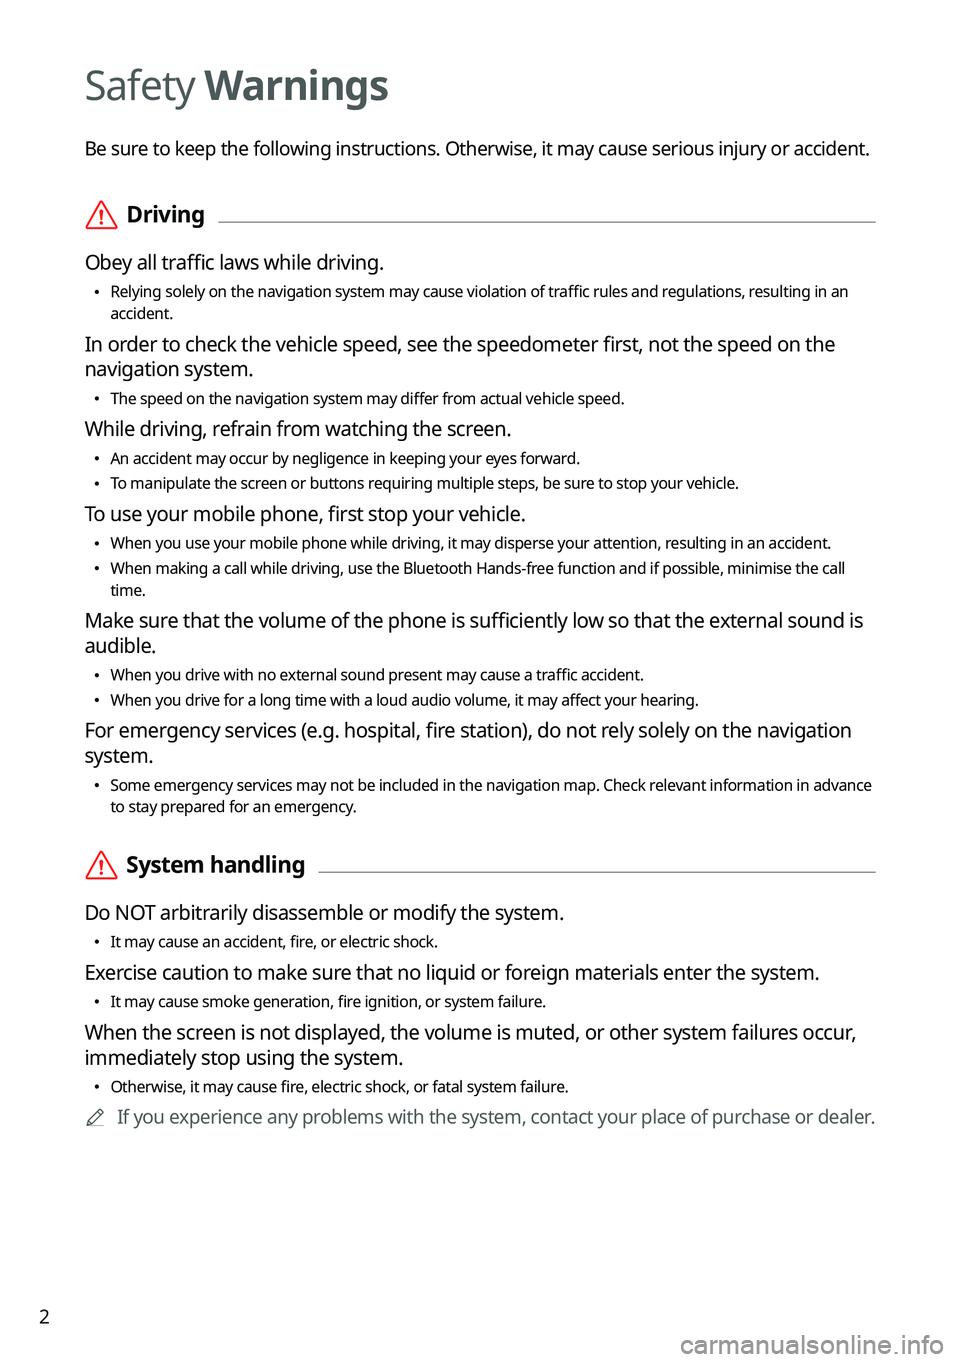 KIA SORENTO PHEV 2023  Navigation System Quick Reference Guide 2
Safety Warnings
Be sure to keep the following instructions. Otherwise, it may cause serious injury or accident.
 ÝDriving
Obey all traffic laws while driving.
 •
Relying solely on the navigation 